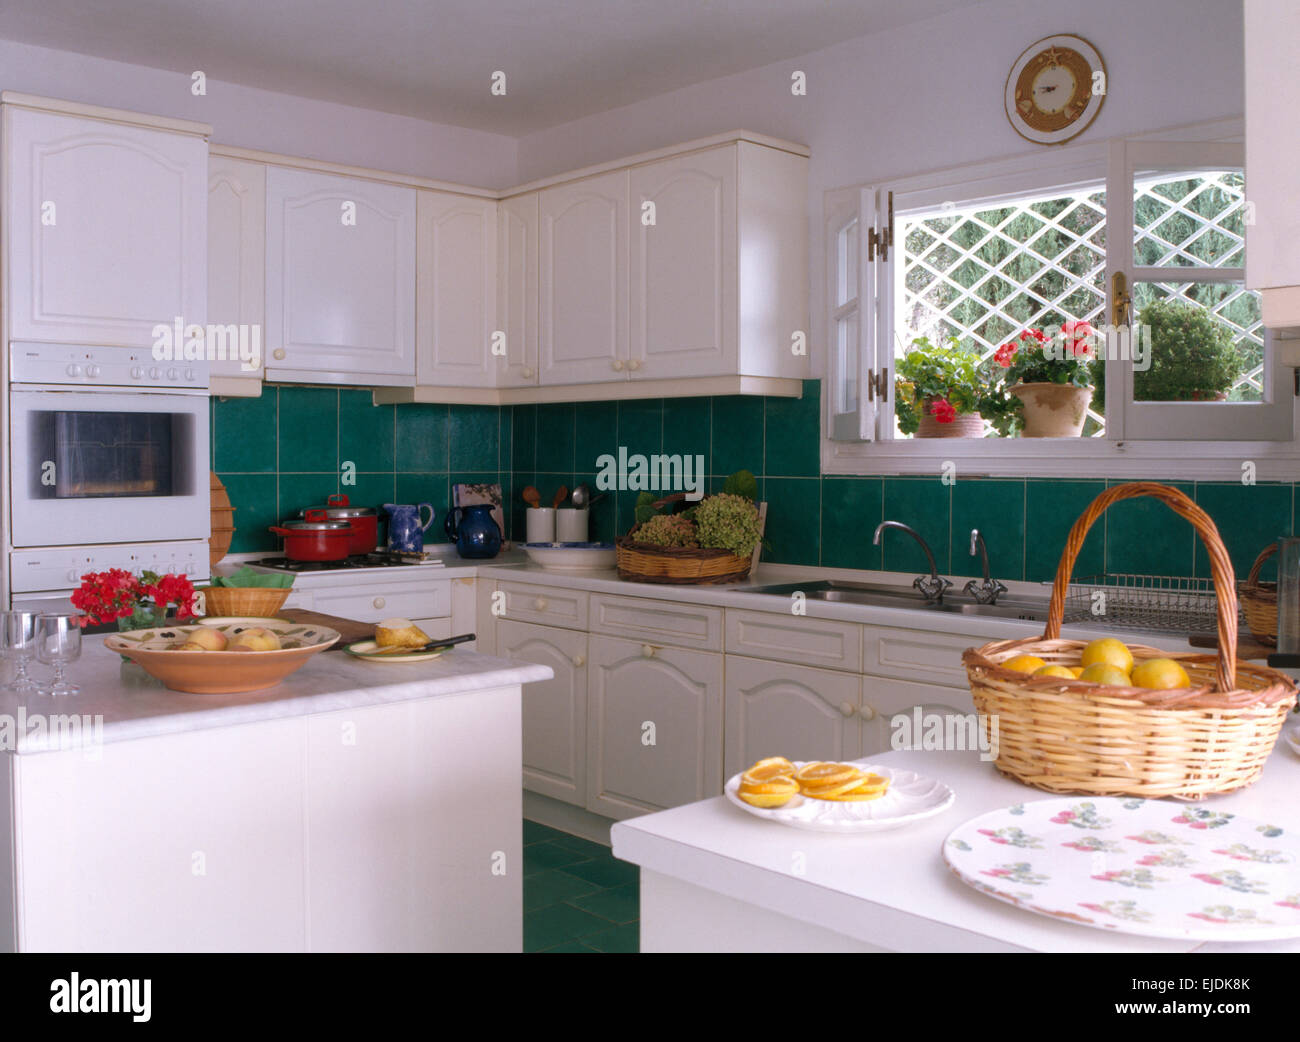 White fitted units in coastal kitchen with green tiled splash back and basket of lemons on worktop Stock Photo